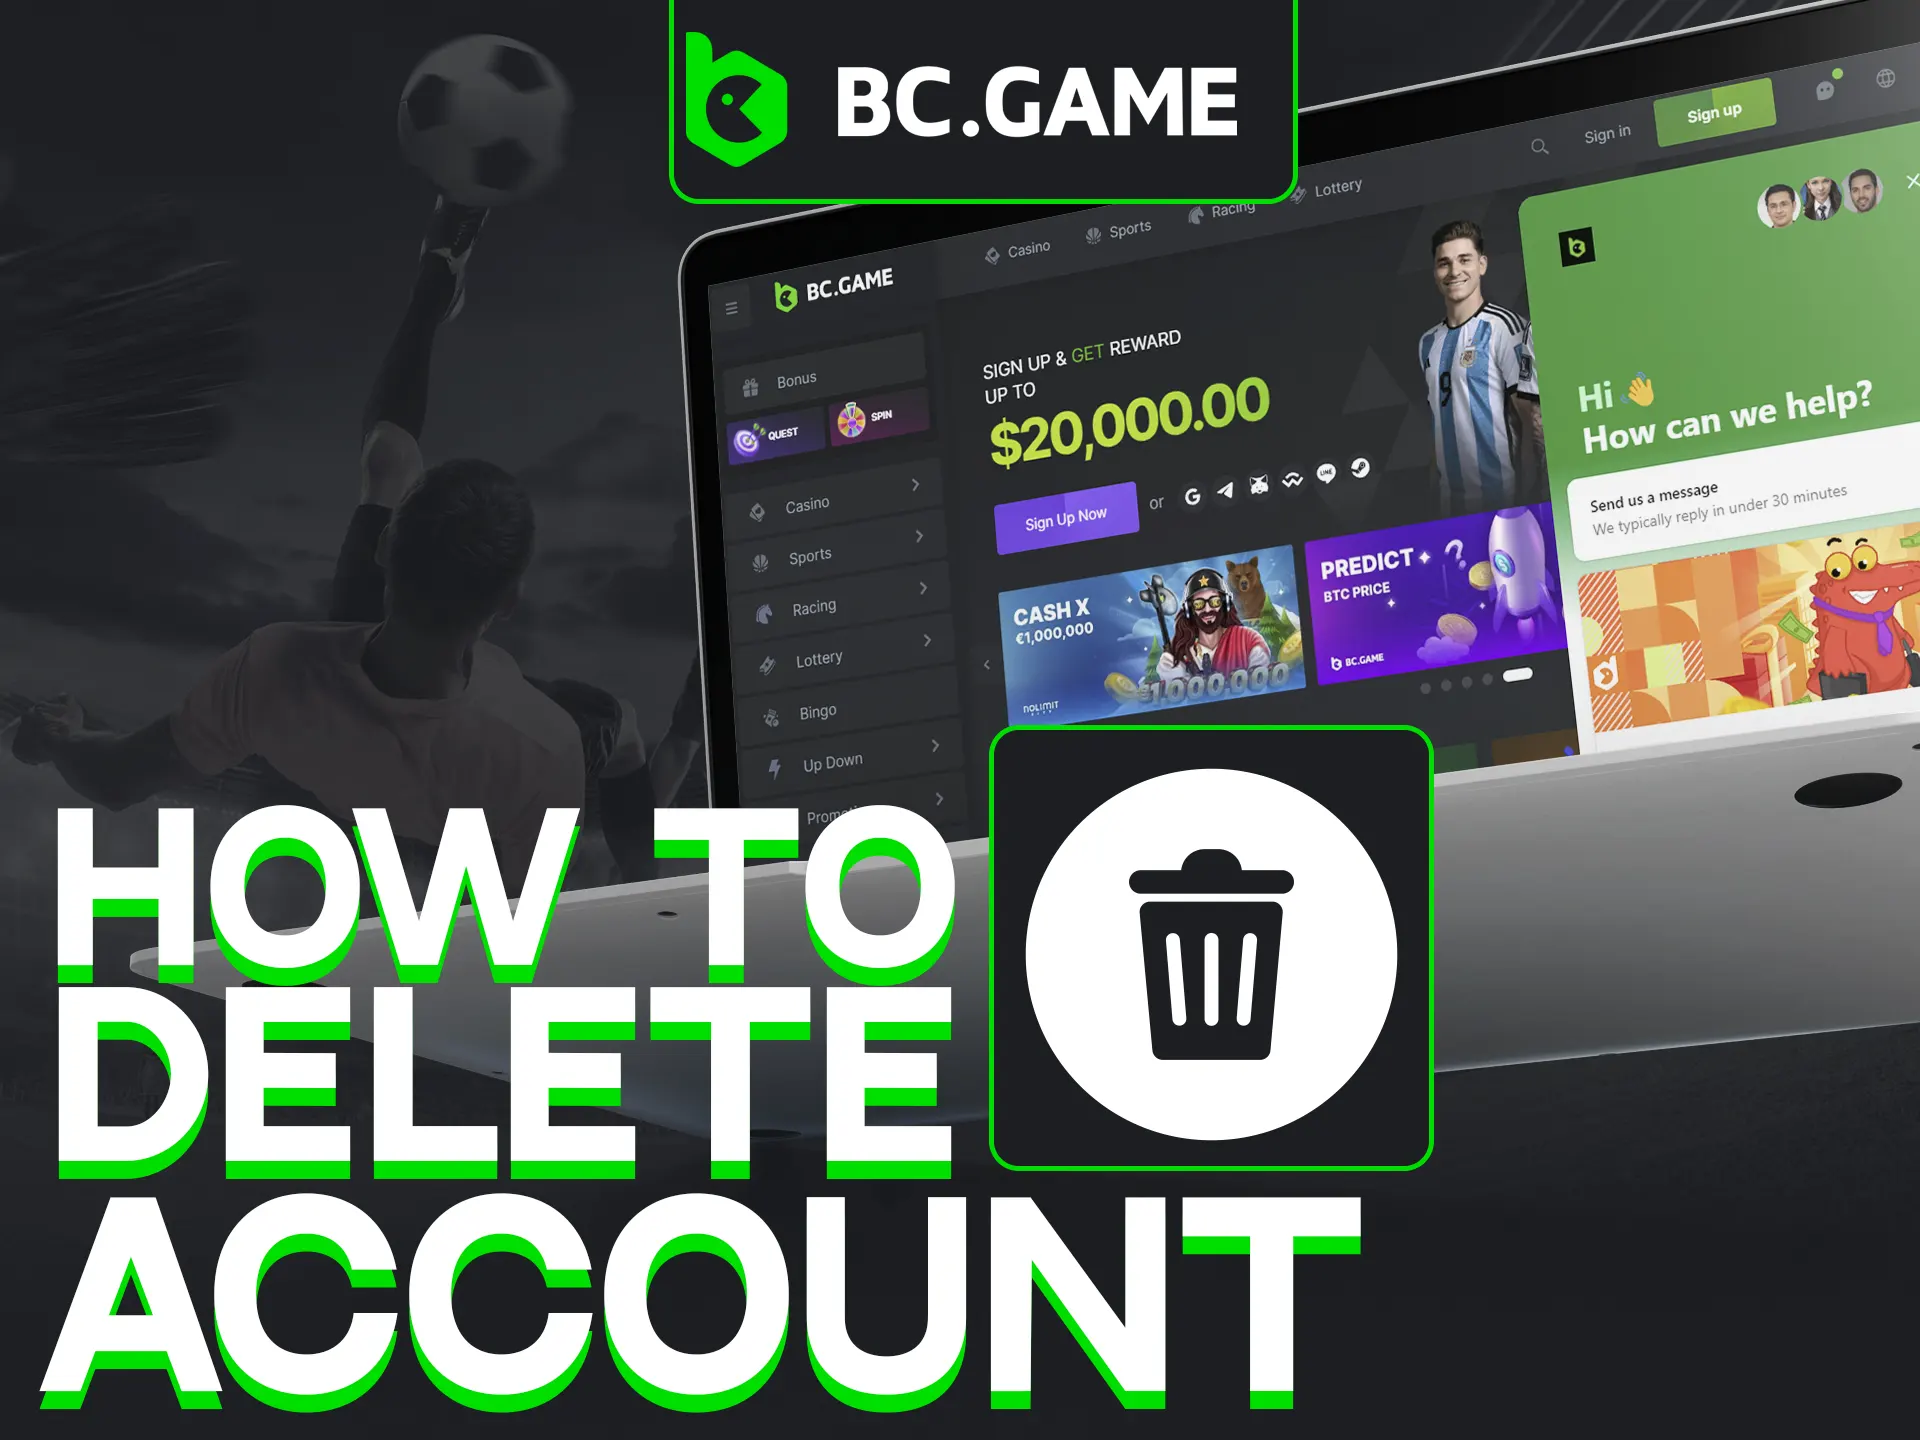 Explore how you can delete your account at BC Game.